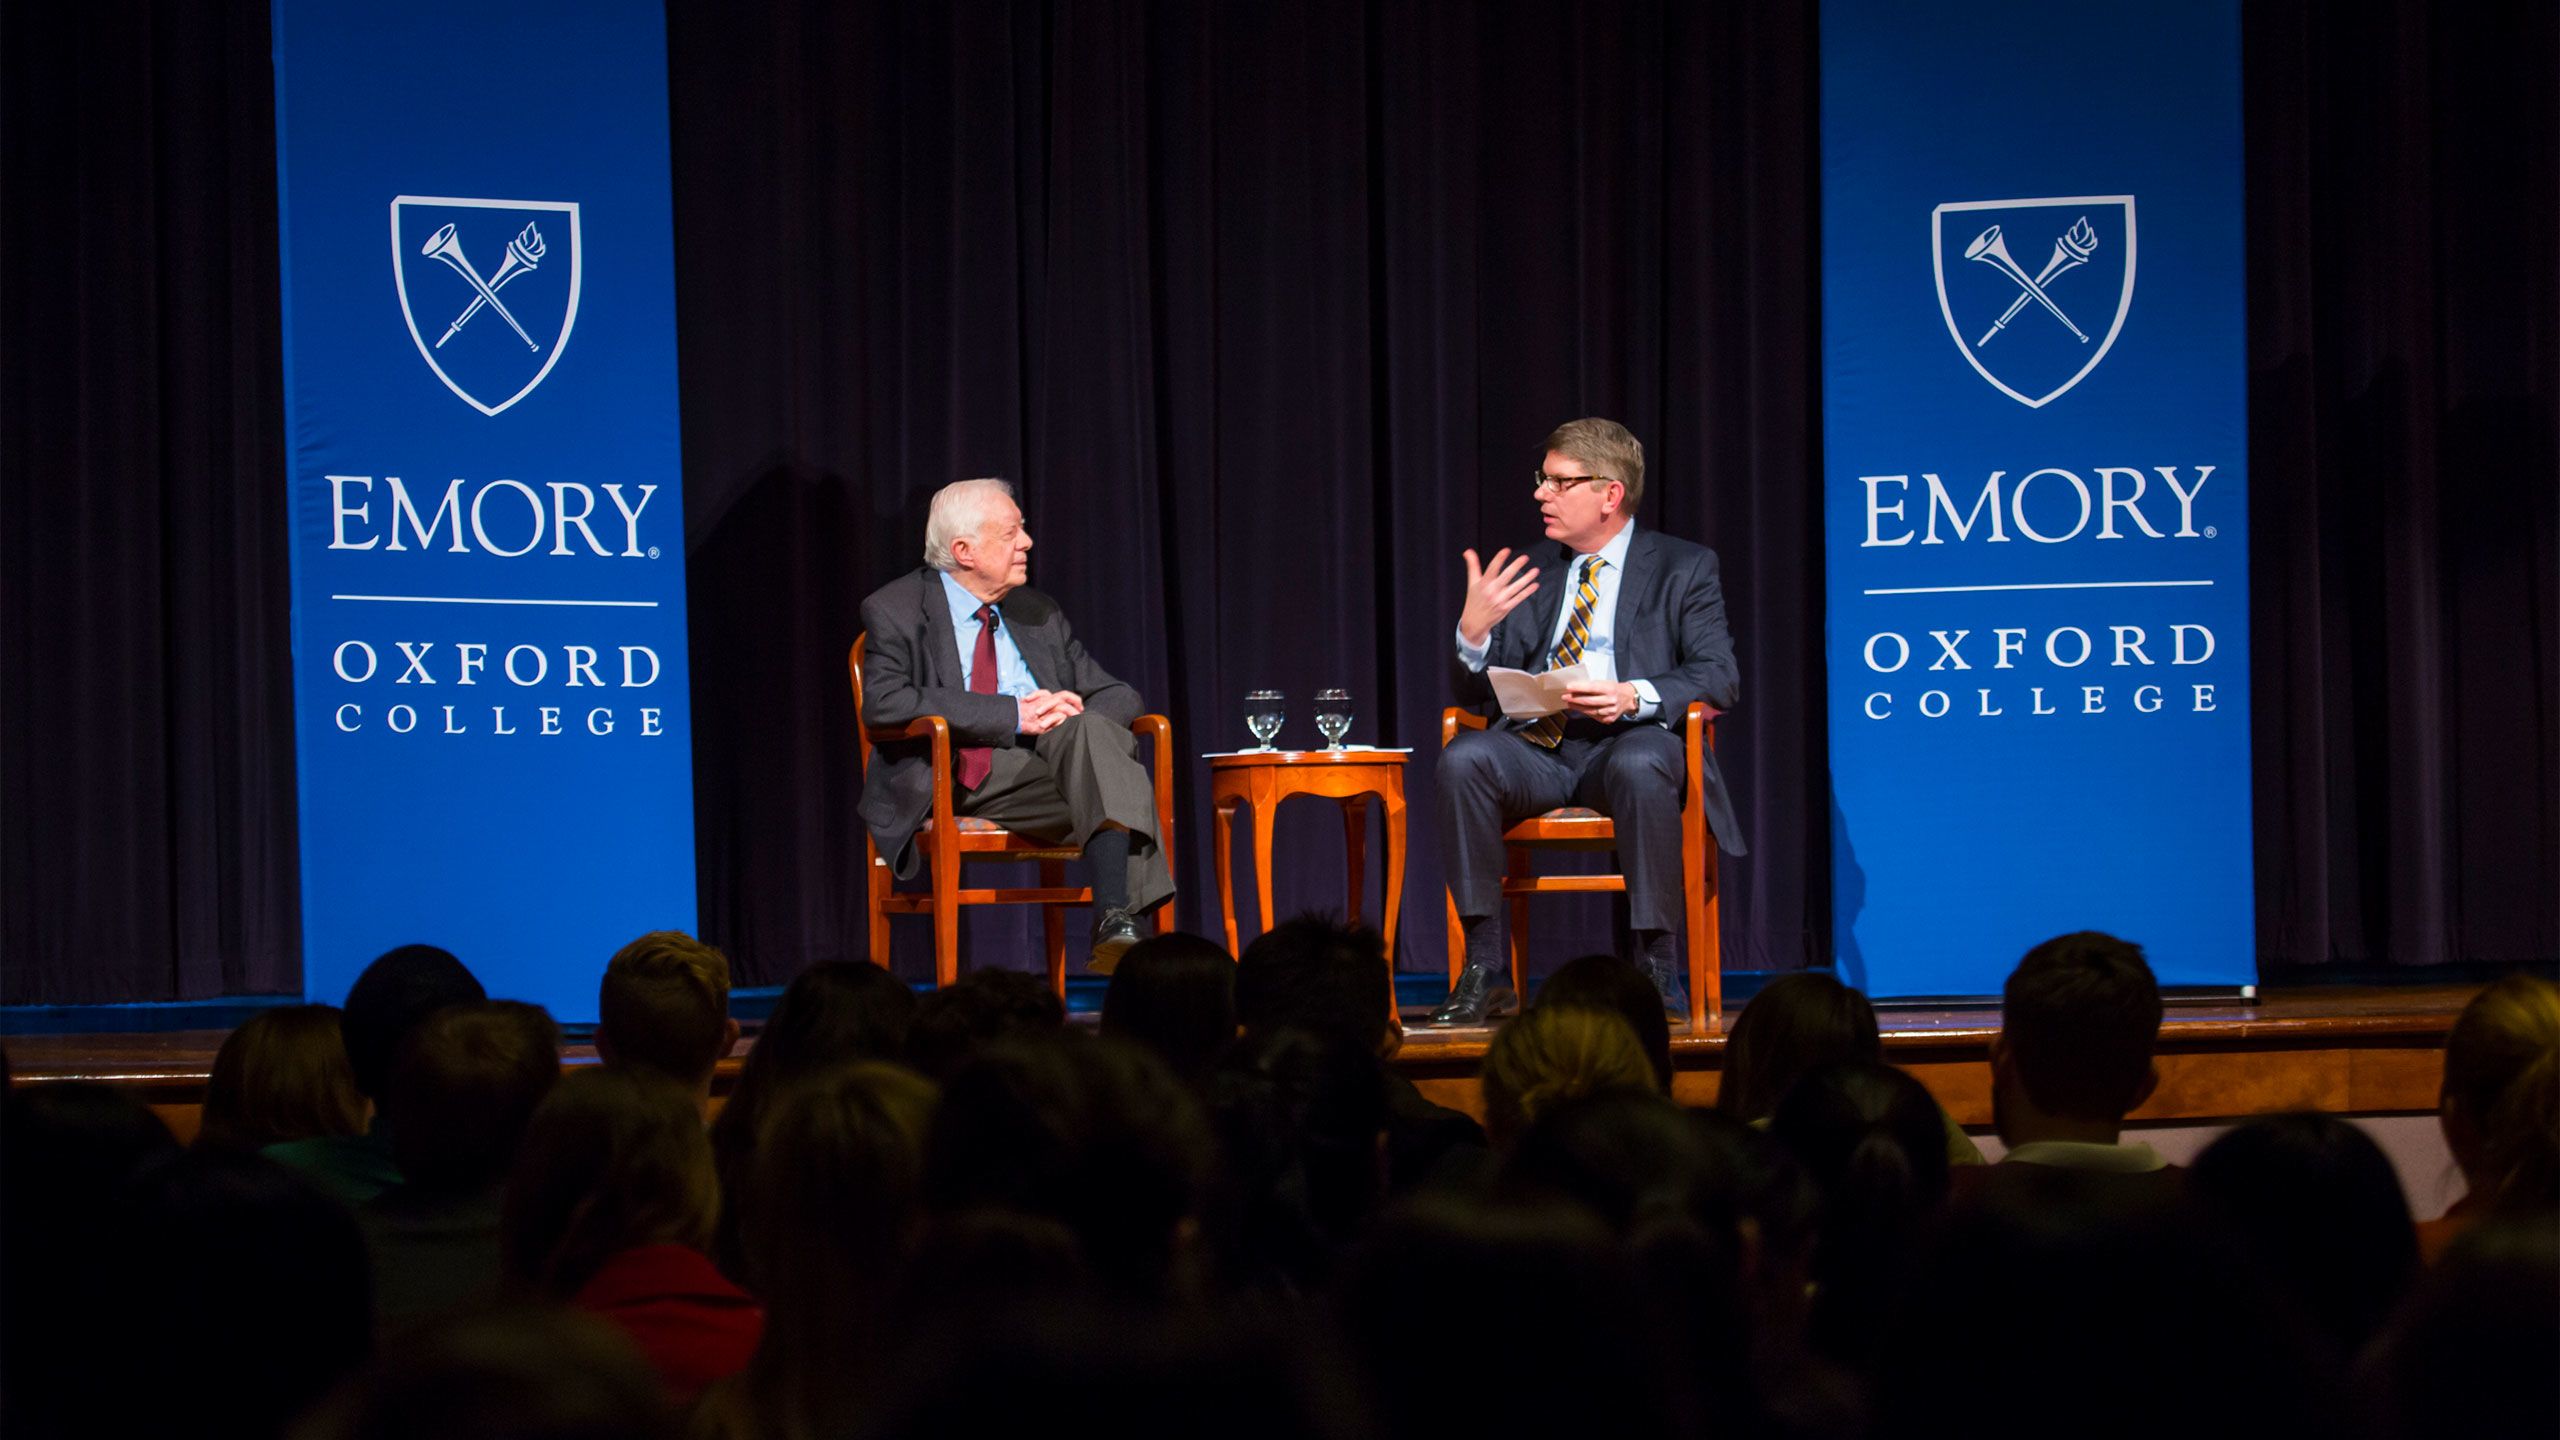 President Jimmy Carter discusses leadership with Oxford College Dean Douglas A. Hicks on a stage at Oxford College